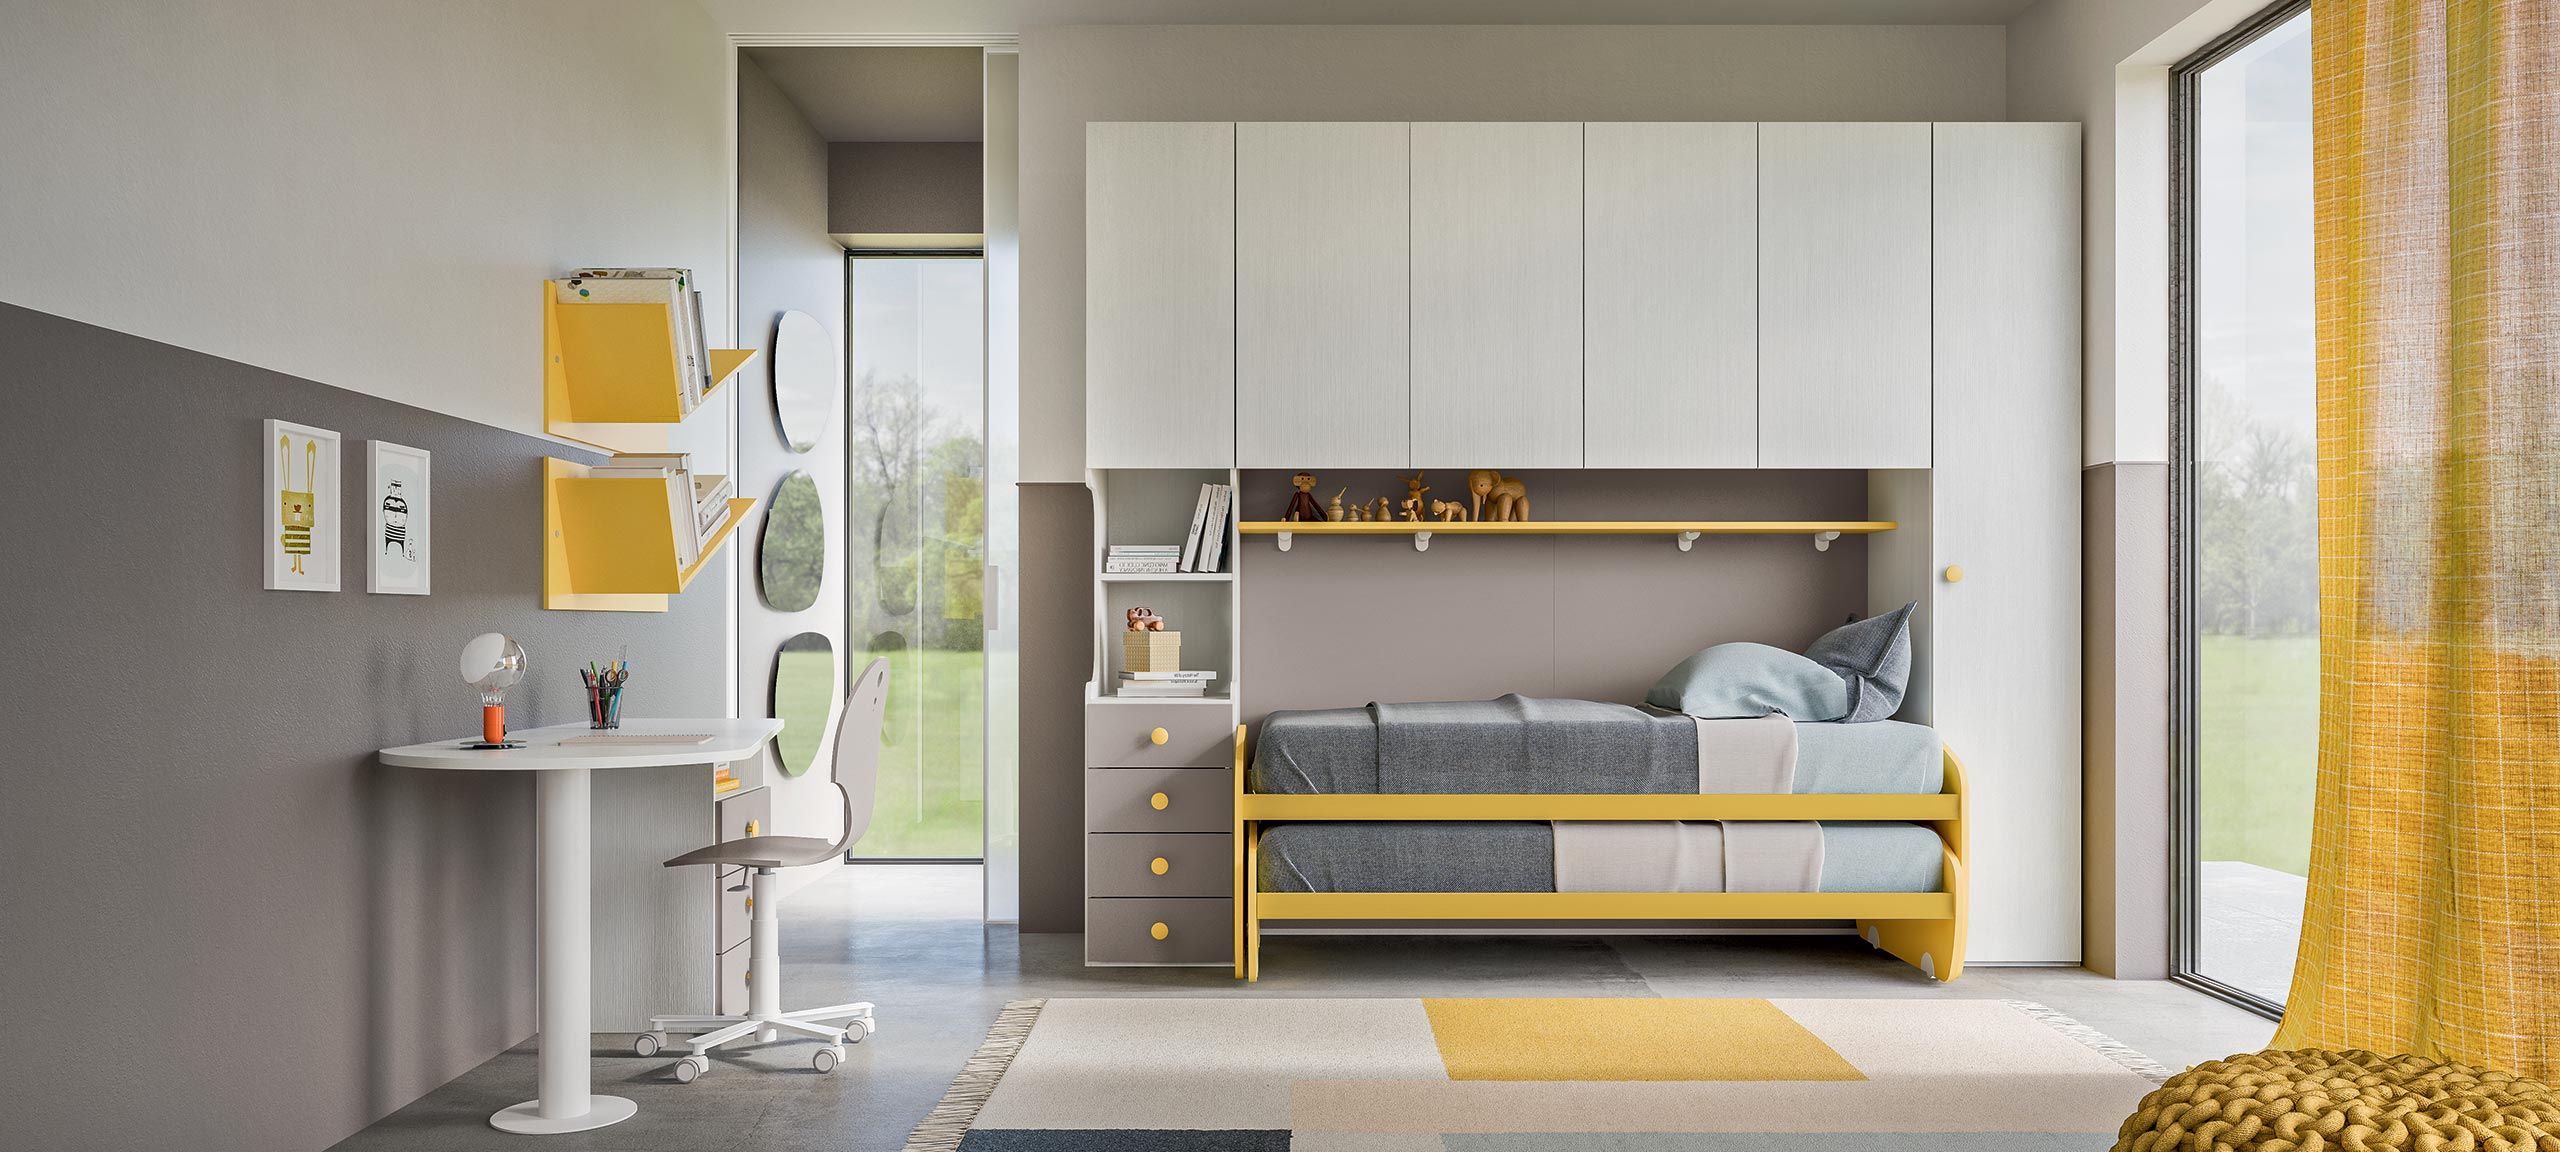 Children?s Bedrooms With Bedroom Cabins | Mab Home Furniture In Overbed Wardrobes (View 5 of 20)